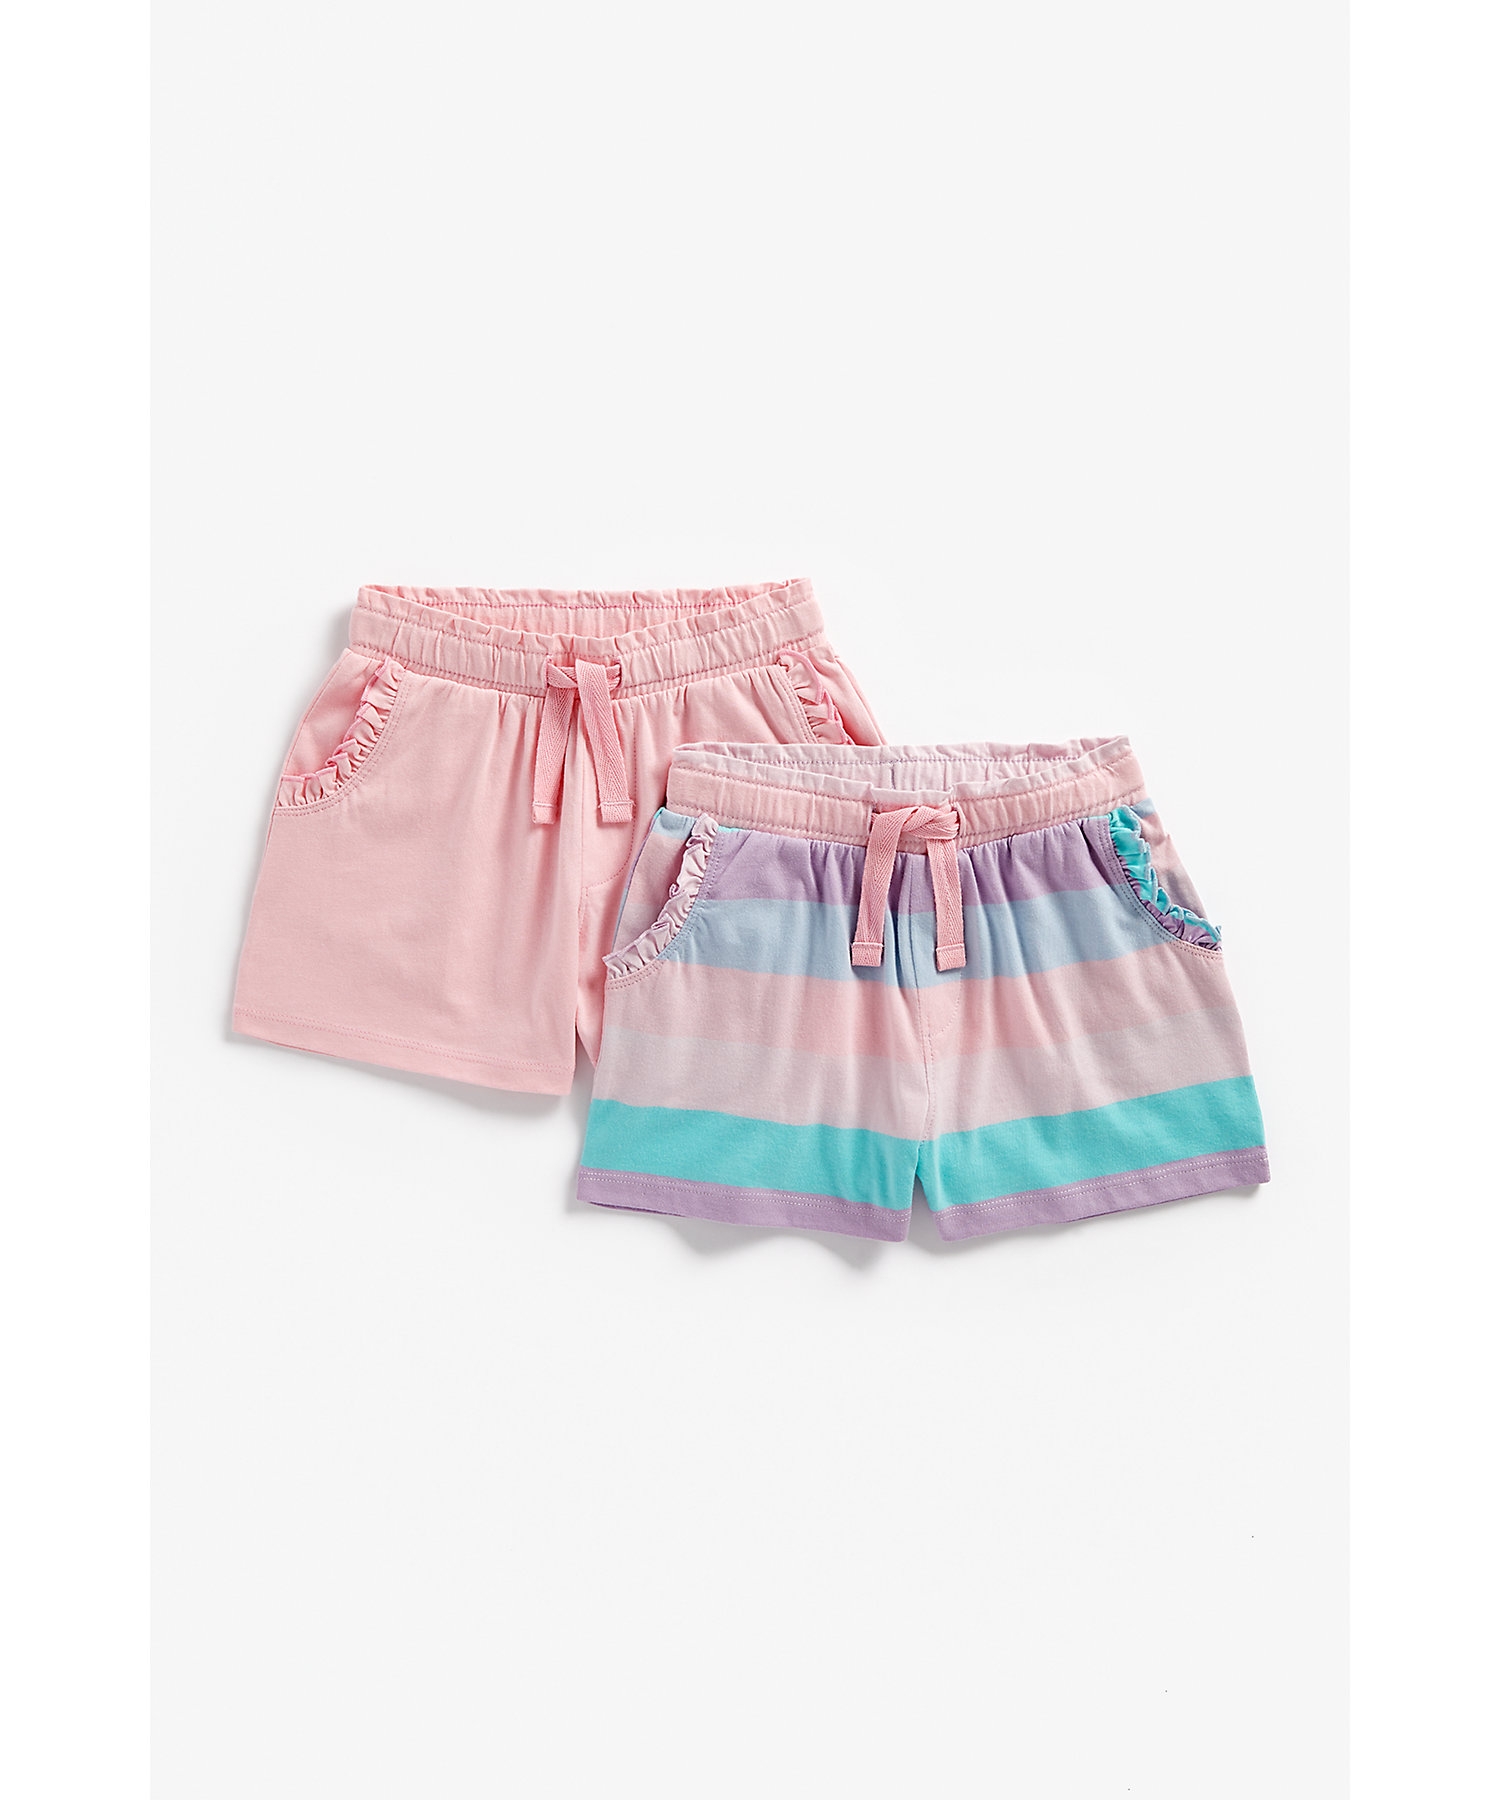 Girls Shorts -Pack of 2-Pink